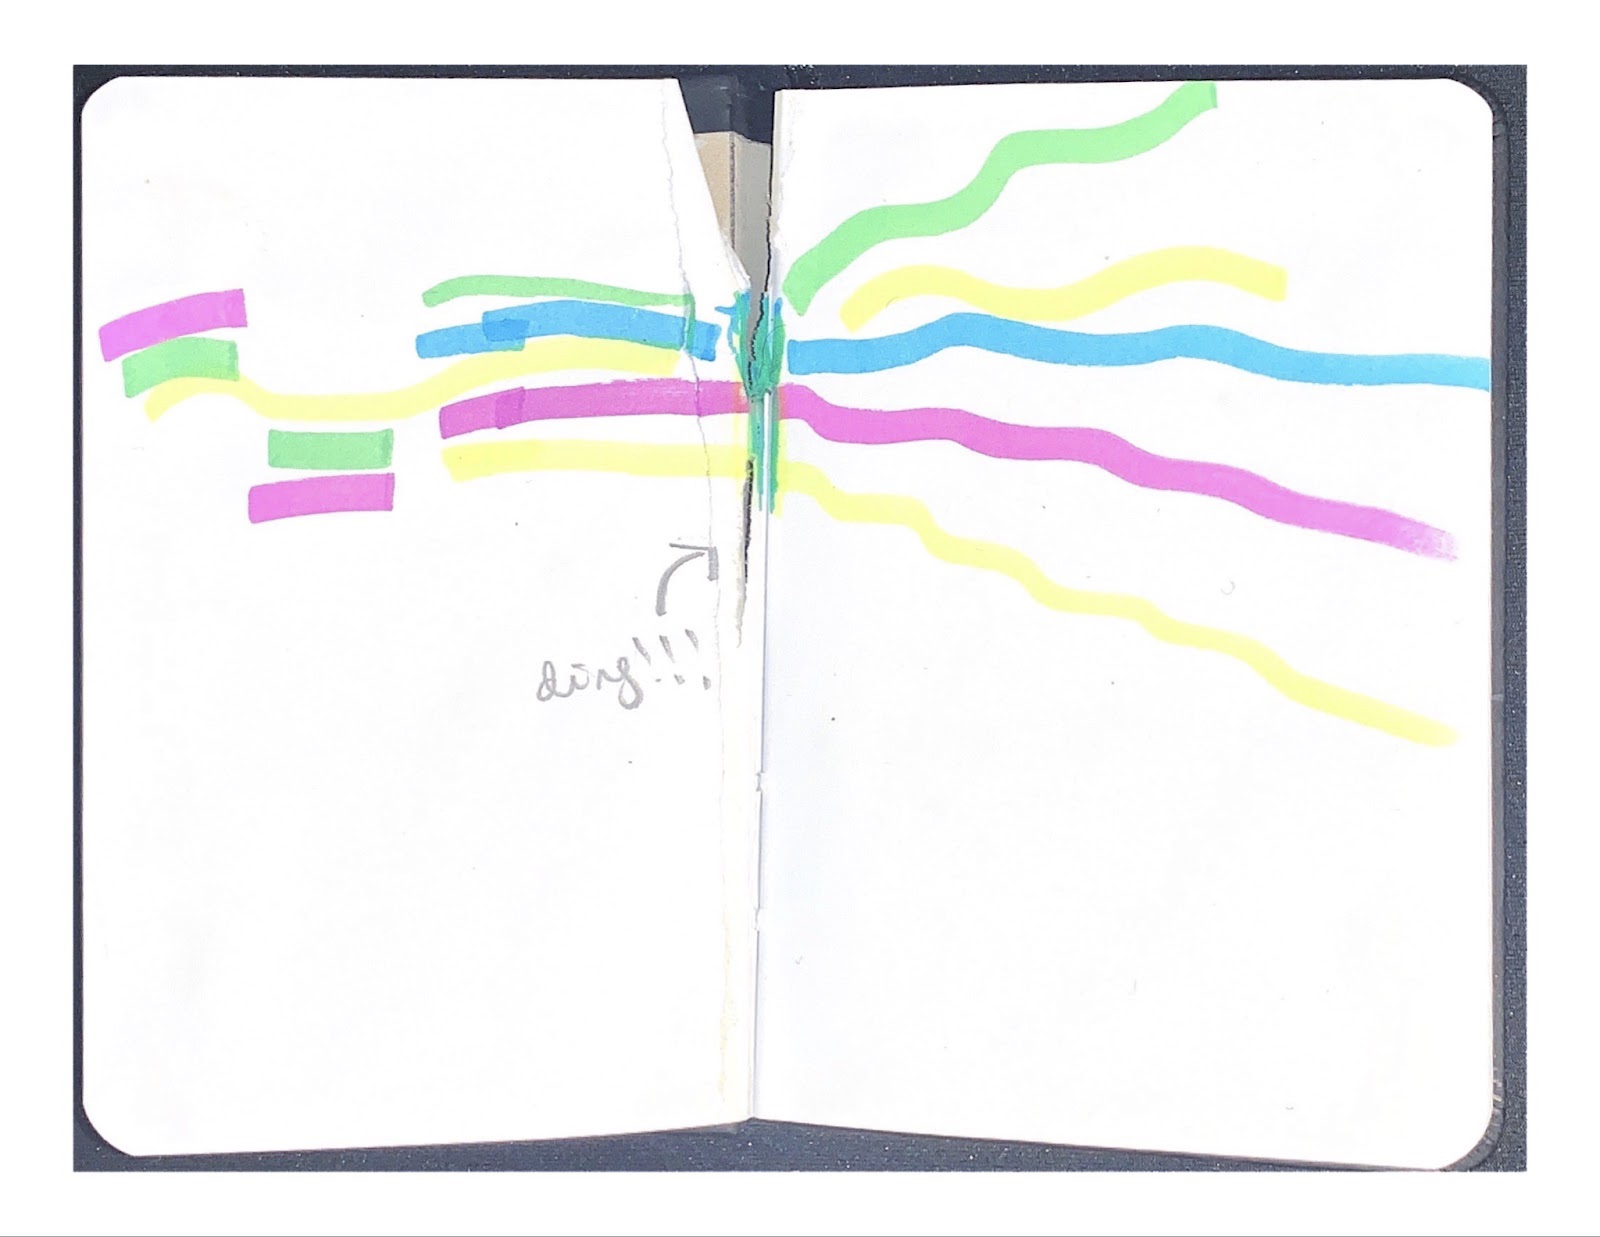 The fourth image in a series of sound design sketches by Talia Augustidis. This image is called Ding! We can see a scan of an open, plain notebook. The seam down the middle of the notebook has begun to tear, as if someone has started to rip out the left hand page. From this crack in the paper a series of brightly coloured thick lines in green, yellow, blue and purple are bursting outwards to the left and right. In pencil there is an arrow pointing to the centre of this explosion, beside the arrow the word ding! Is written like a joyful resonance.